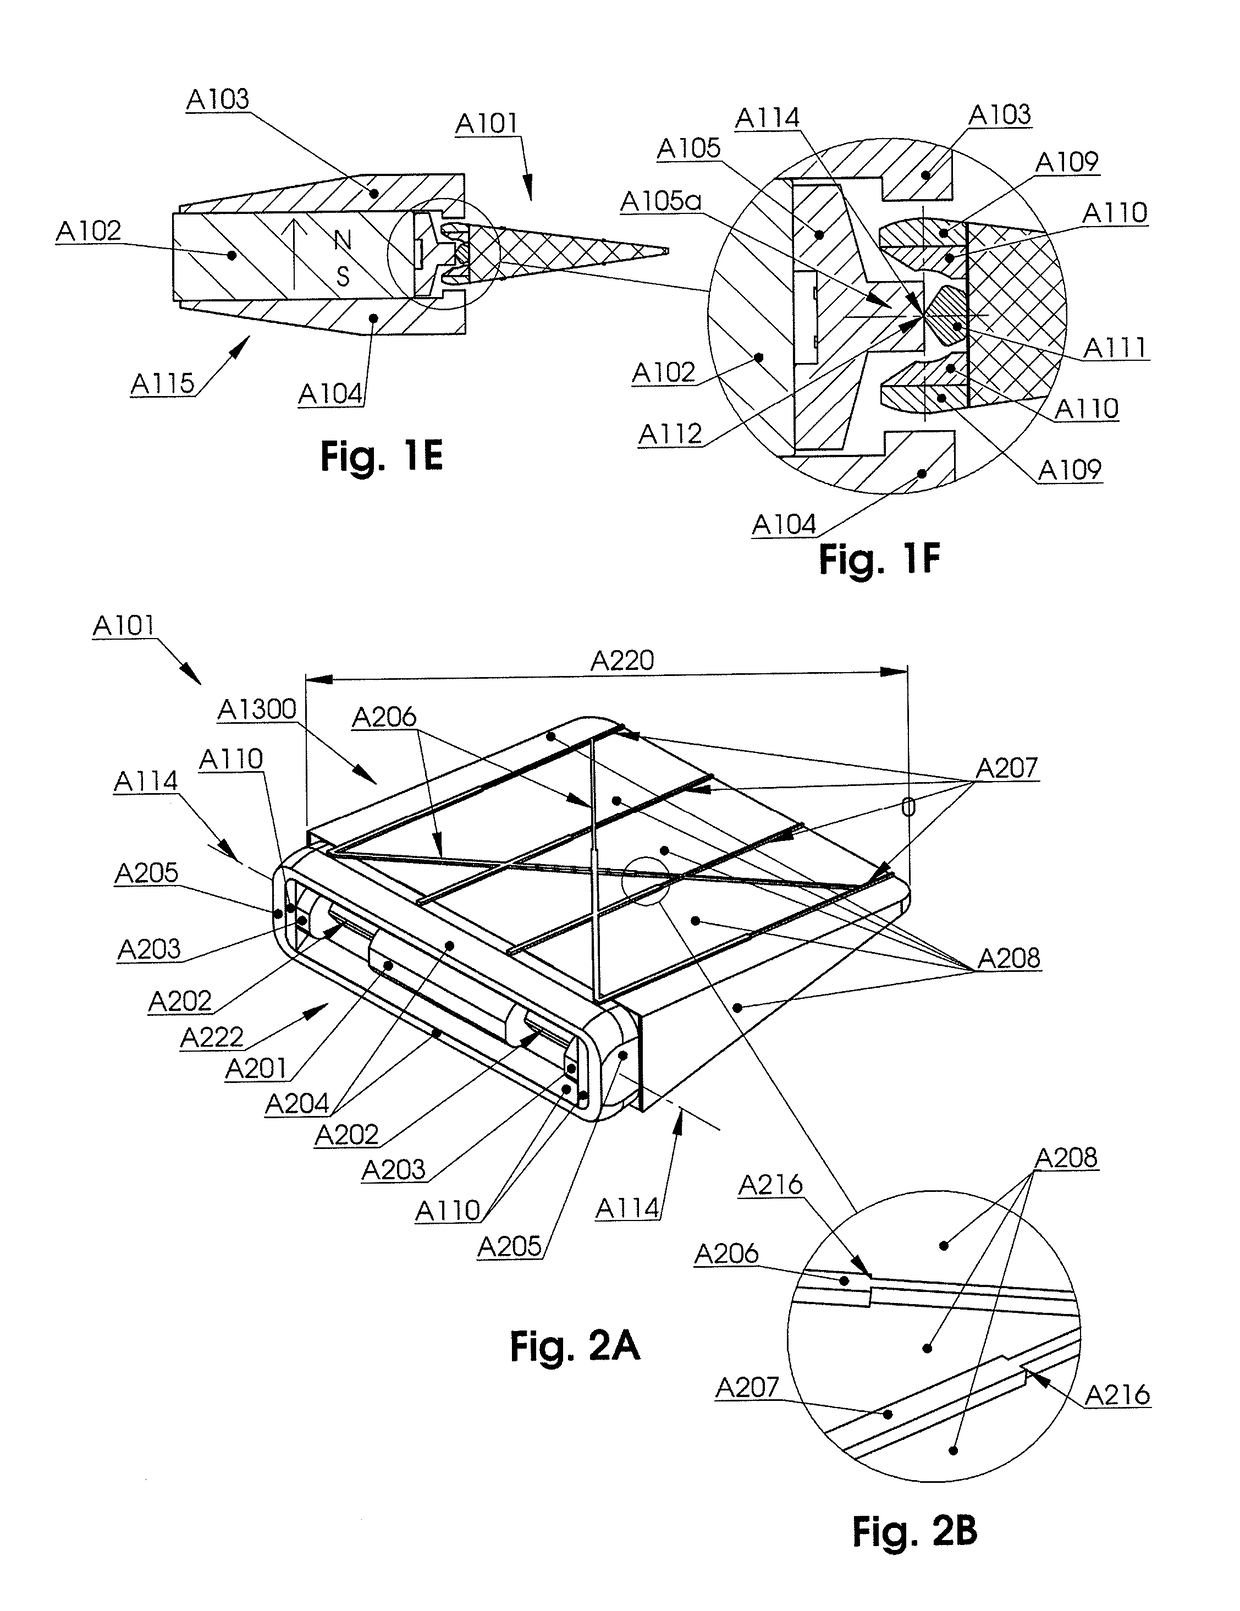 Hinge systems for audio transducers and audio transducers or devices incorporating the same